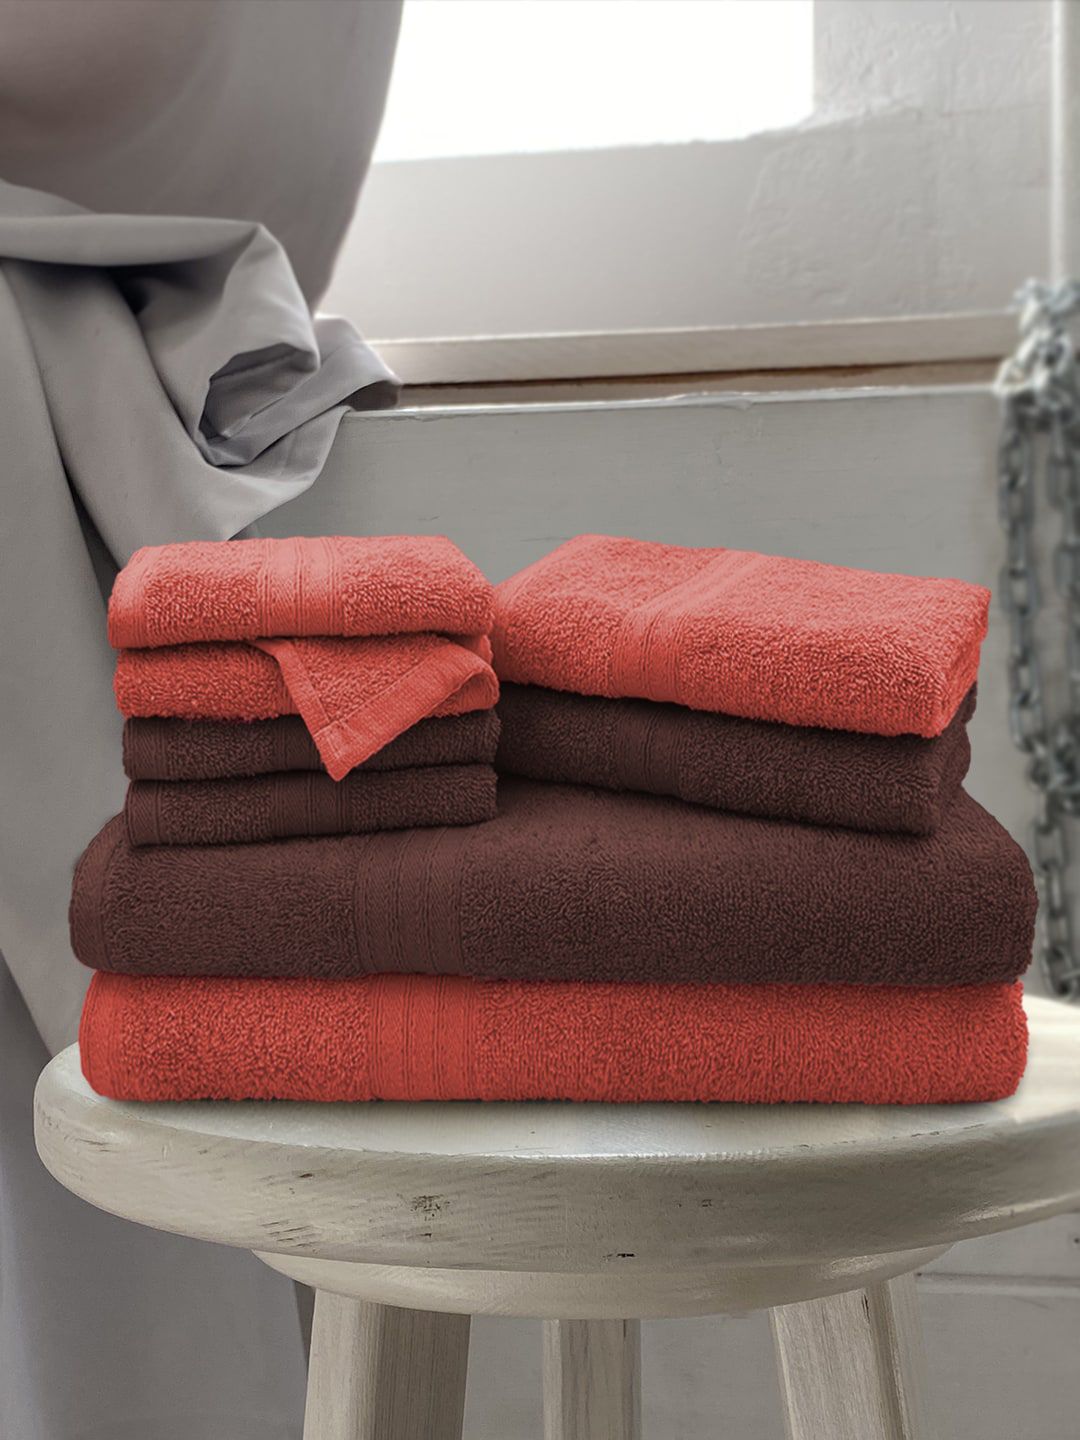 Aura Set of 8 Cotton 500 GSM Towels Price in India